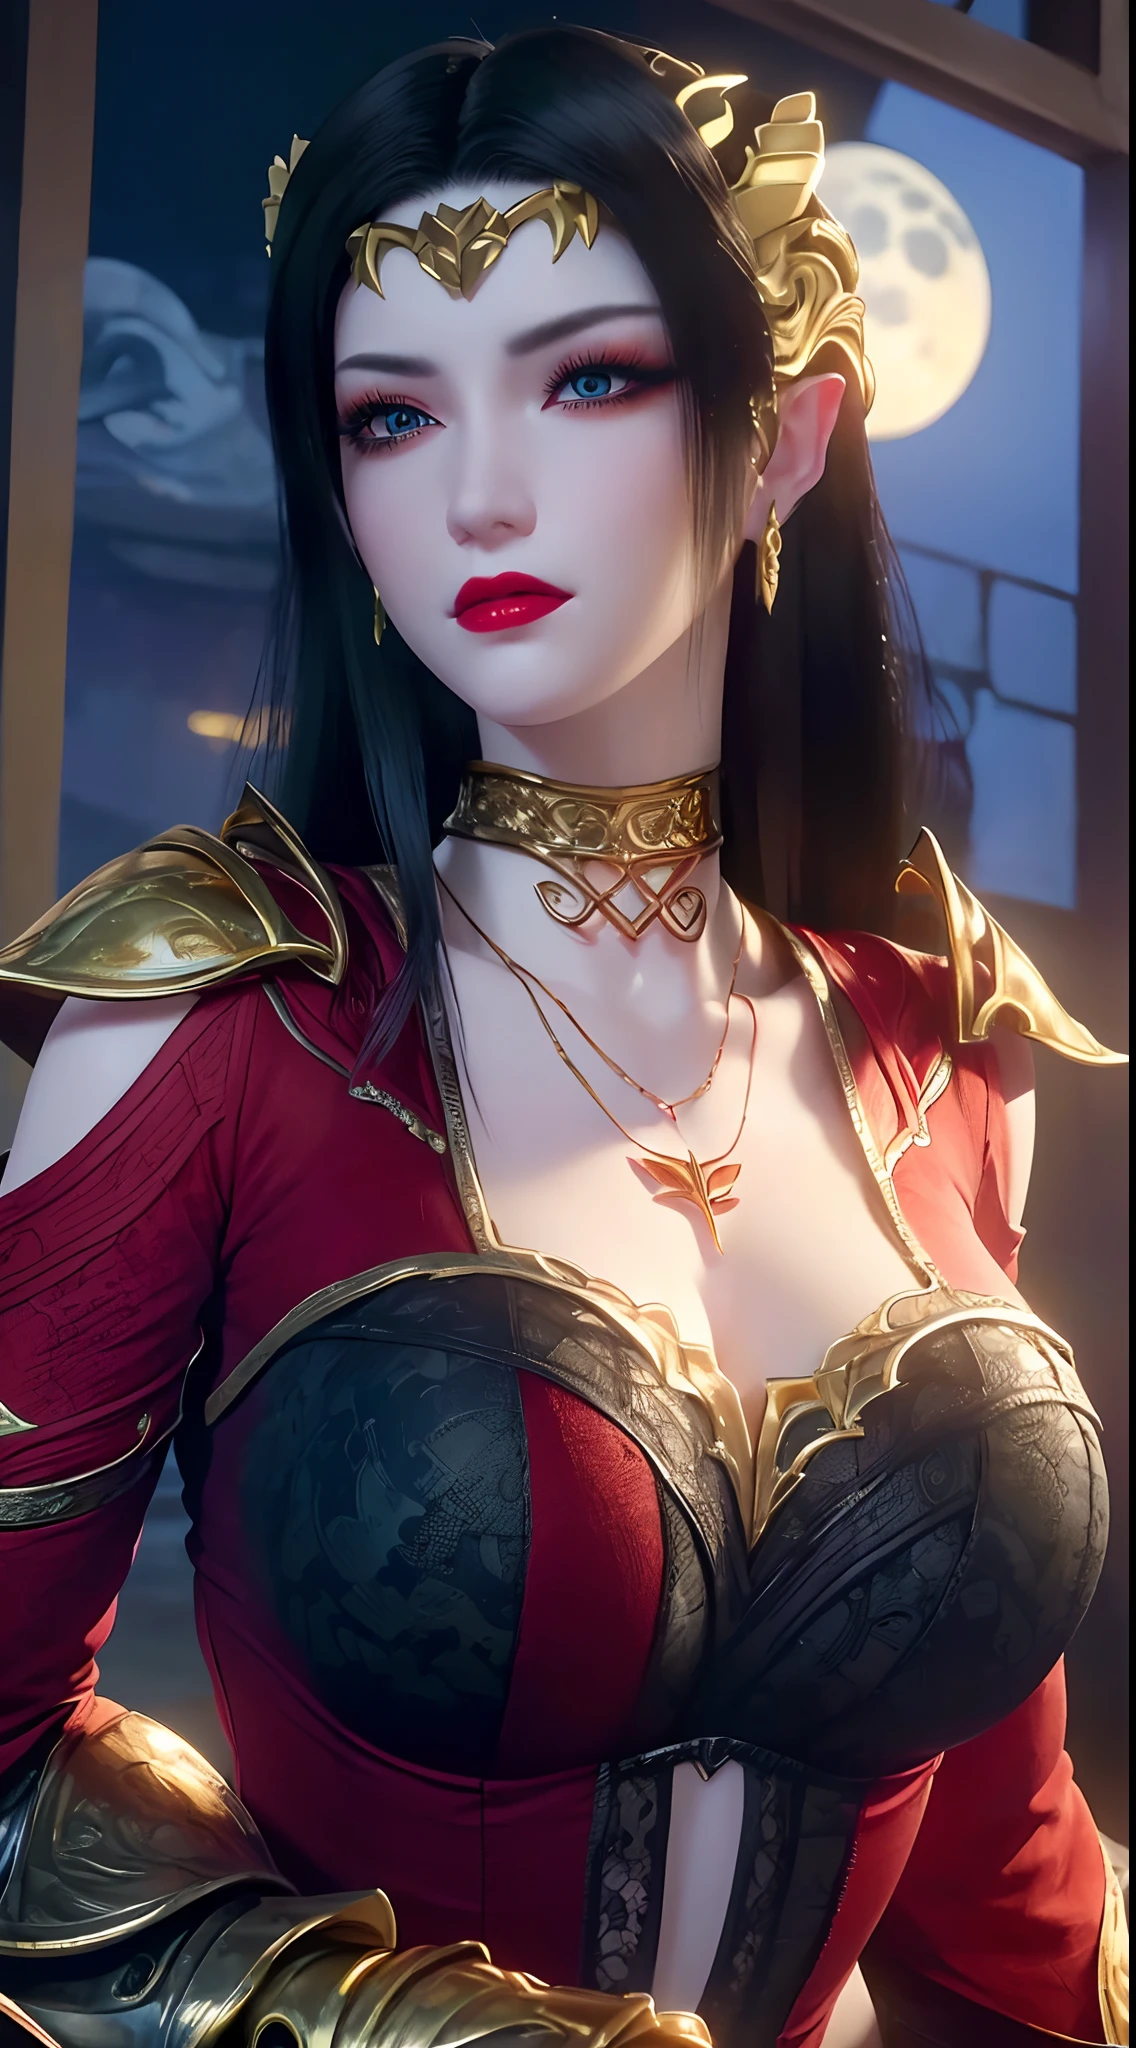 1 extremely beautiful queens,((wearing sexy red and black armor :1.6)), (((Eye-catching patterns on the shirt:1.6))), ((long black hair:1.6)), jewelry elaborately made from precious stones and beautiful hair, ((wearing a 24k gold lace necklace:1.4))), the noble, noble style of an extremely beautiful girl, her small face is super cute, her face is very pretty, thin eyebrows, flawless beautiful face, ((black eye pupils: 0.8)), very beautiful eyes, ((platinum blue eyes: 1.6)), (((eyes wide open:1.6))), nice makeup and hair detailed eyelashes, steamy eye makeup, high nose, earrings, red lips, ((closed mouth: 1.5)) beautiful lips, slim hands, most beautiful thighs, ((arms spread out to the sides: 1.5)), rosy face, clean face, flawless beautiful face, smooth white skin, (big breasts: 1.5)), ((high breasts: 1.6)), tight breasts, beautiful cleavage, (((big breasts and super round: 1.8))), ((super tight breasts: 1.7)) , beautiful breasts, perfect body, back arms, chest out, thin black mesh stockings with black lace trim, 8k photo, super high quality, super realistic, super 10x pixels, optical, bright studio, bright edges, dual-tone lighting, (high-detail skin:1.2), super 8k, soft lighting, high quality, volumetric lighting, photorealistic, photorealistic high resolution, lighting, best photo, 4k, 8k quality, blur effect, smooth sharp, 10 x pixel, ((sea and moonlight at night background:1.5)), aurora, lightning, super graphics realistic, most realistic graphics, 1 girl, alone, solo, Extremely sharp image, surreal, (((frontal portrait: 1)))."